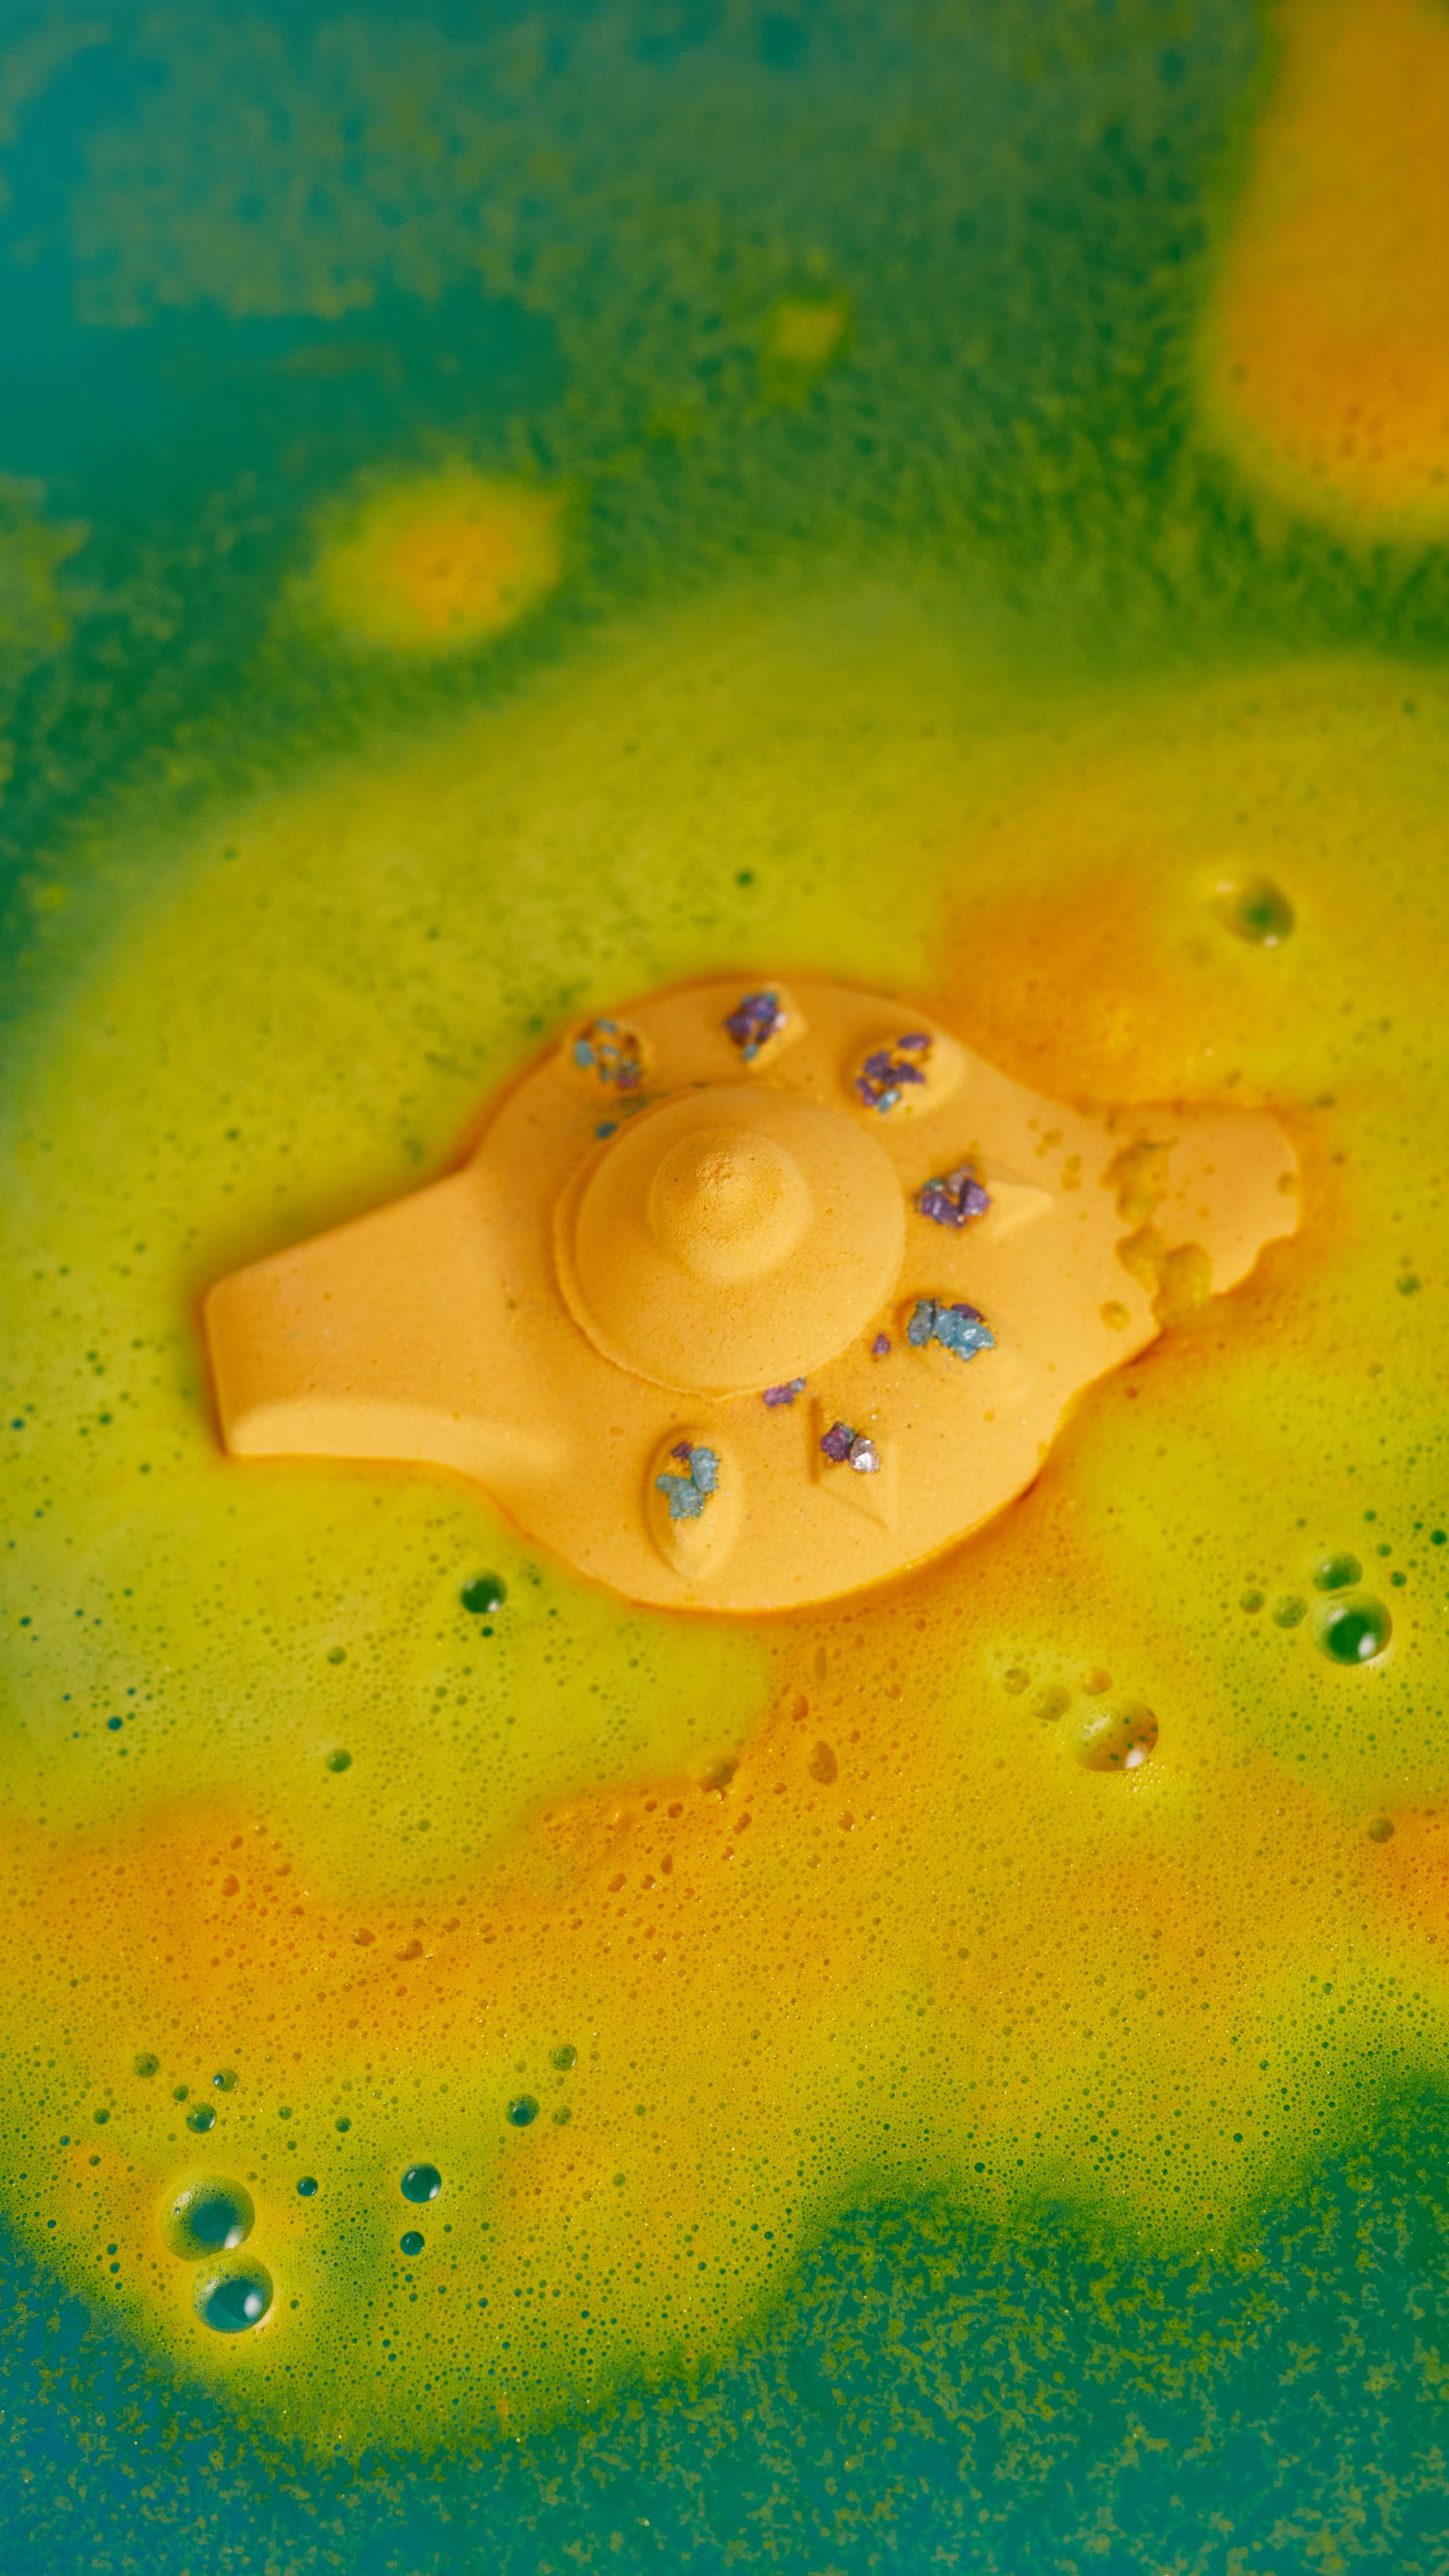 Image shows The Wishing Lamp bath bomb in bath water slowly dispersing its bright yellow outer layer in thick foamy waves.